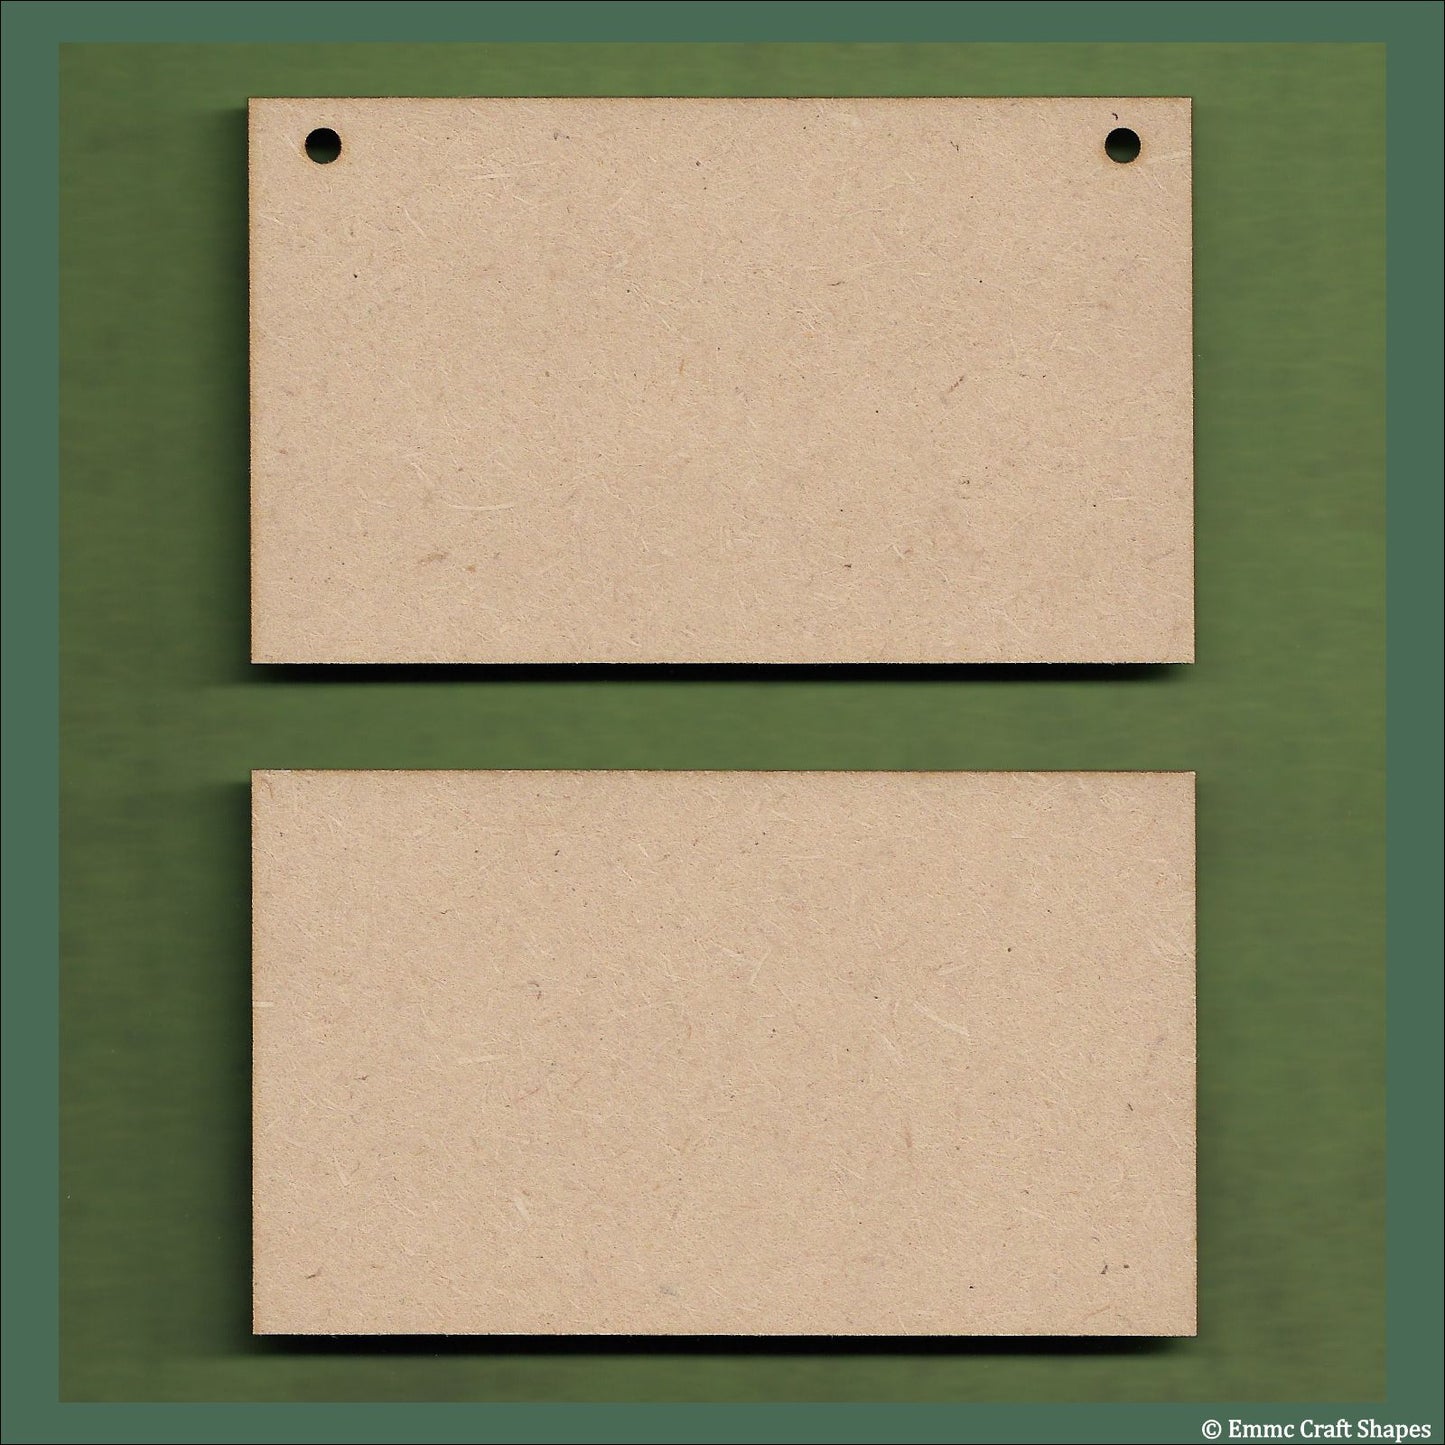 5 cm Wide 3mm thick MDF Plaques with square corners